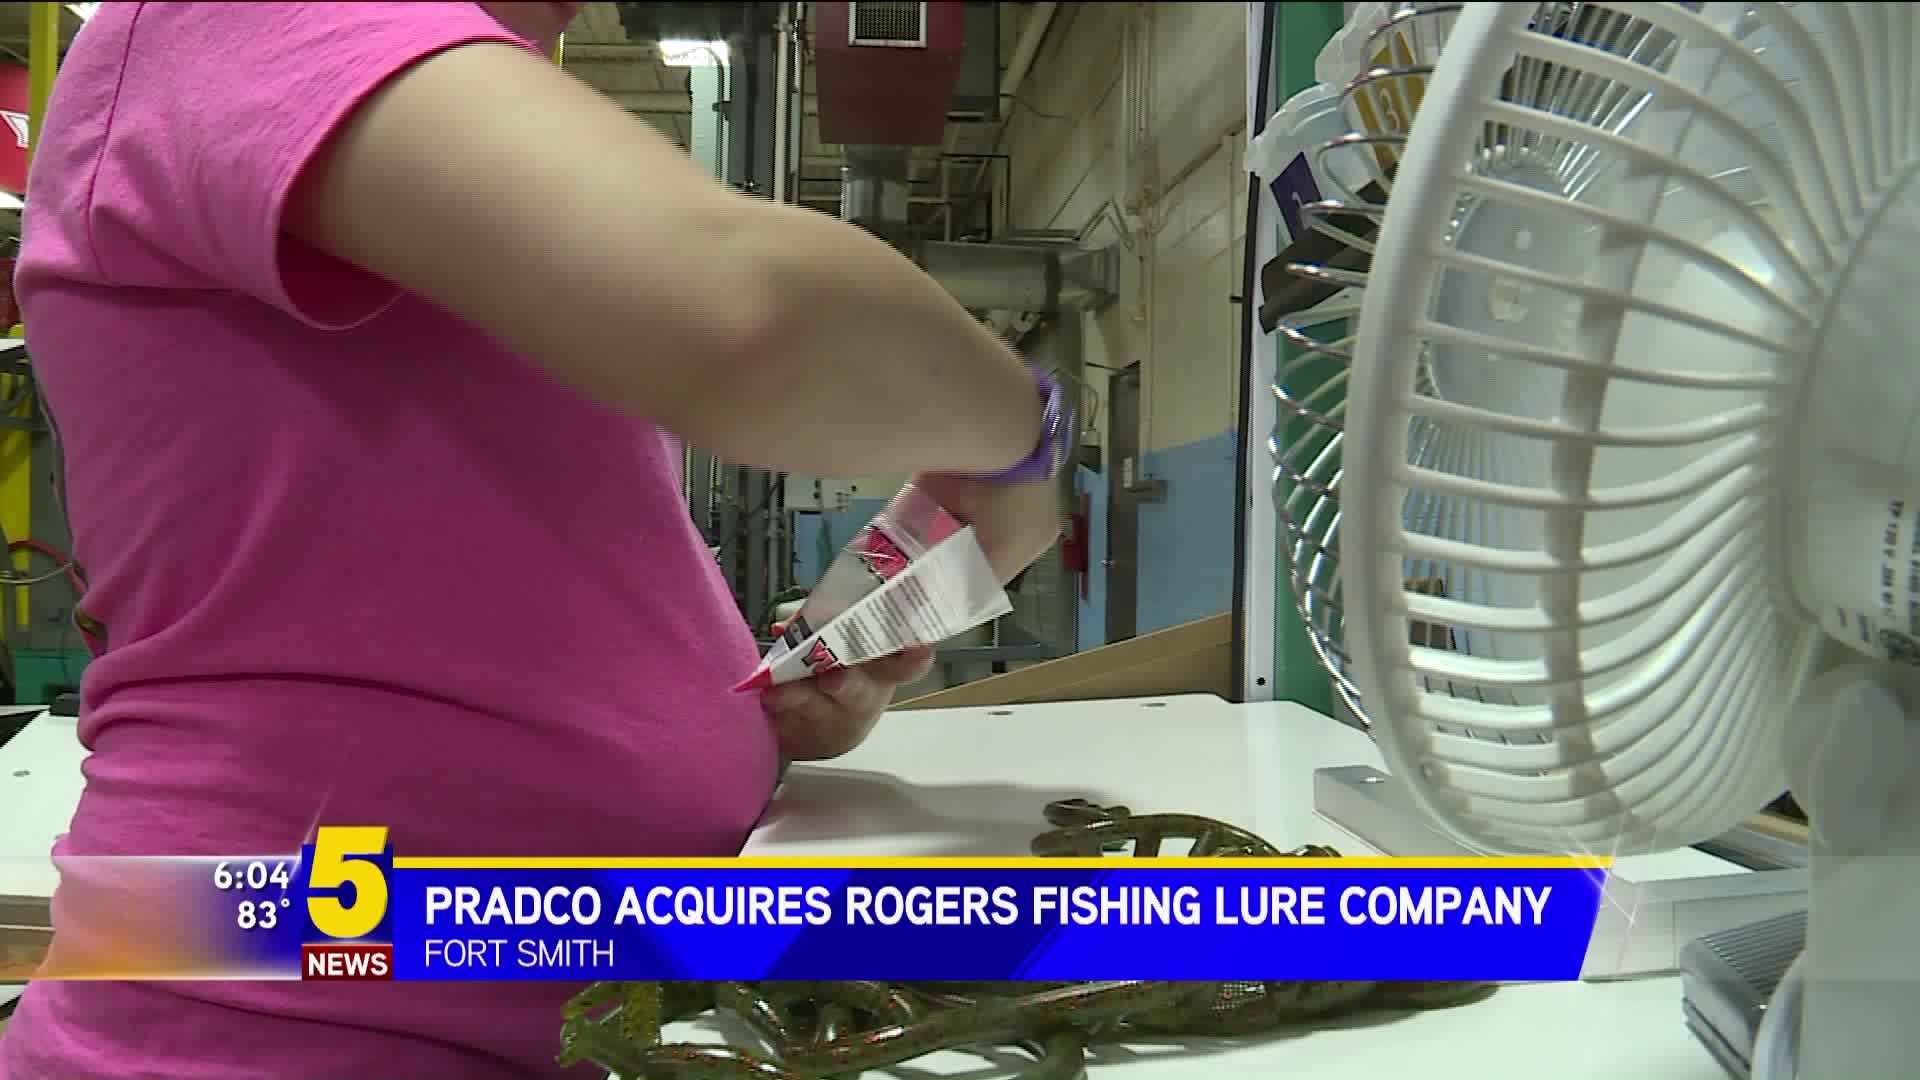 Pradco Pushes To Become Number One In Fishing Lures After Acquiring Rogers  Based Company